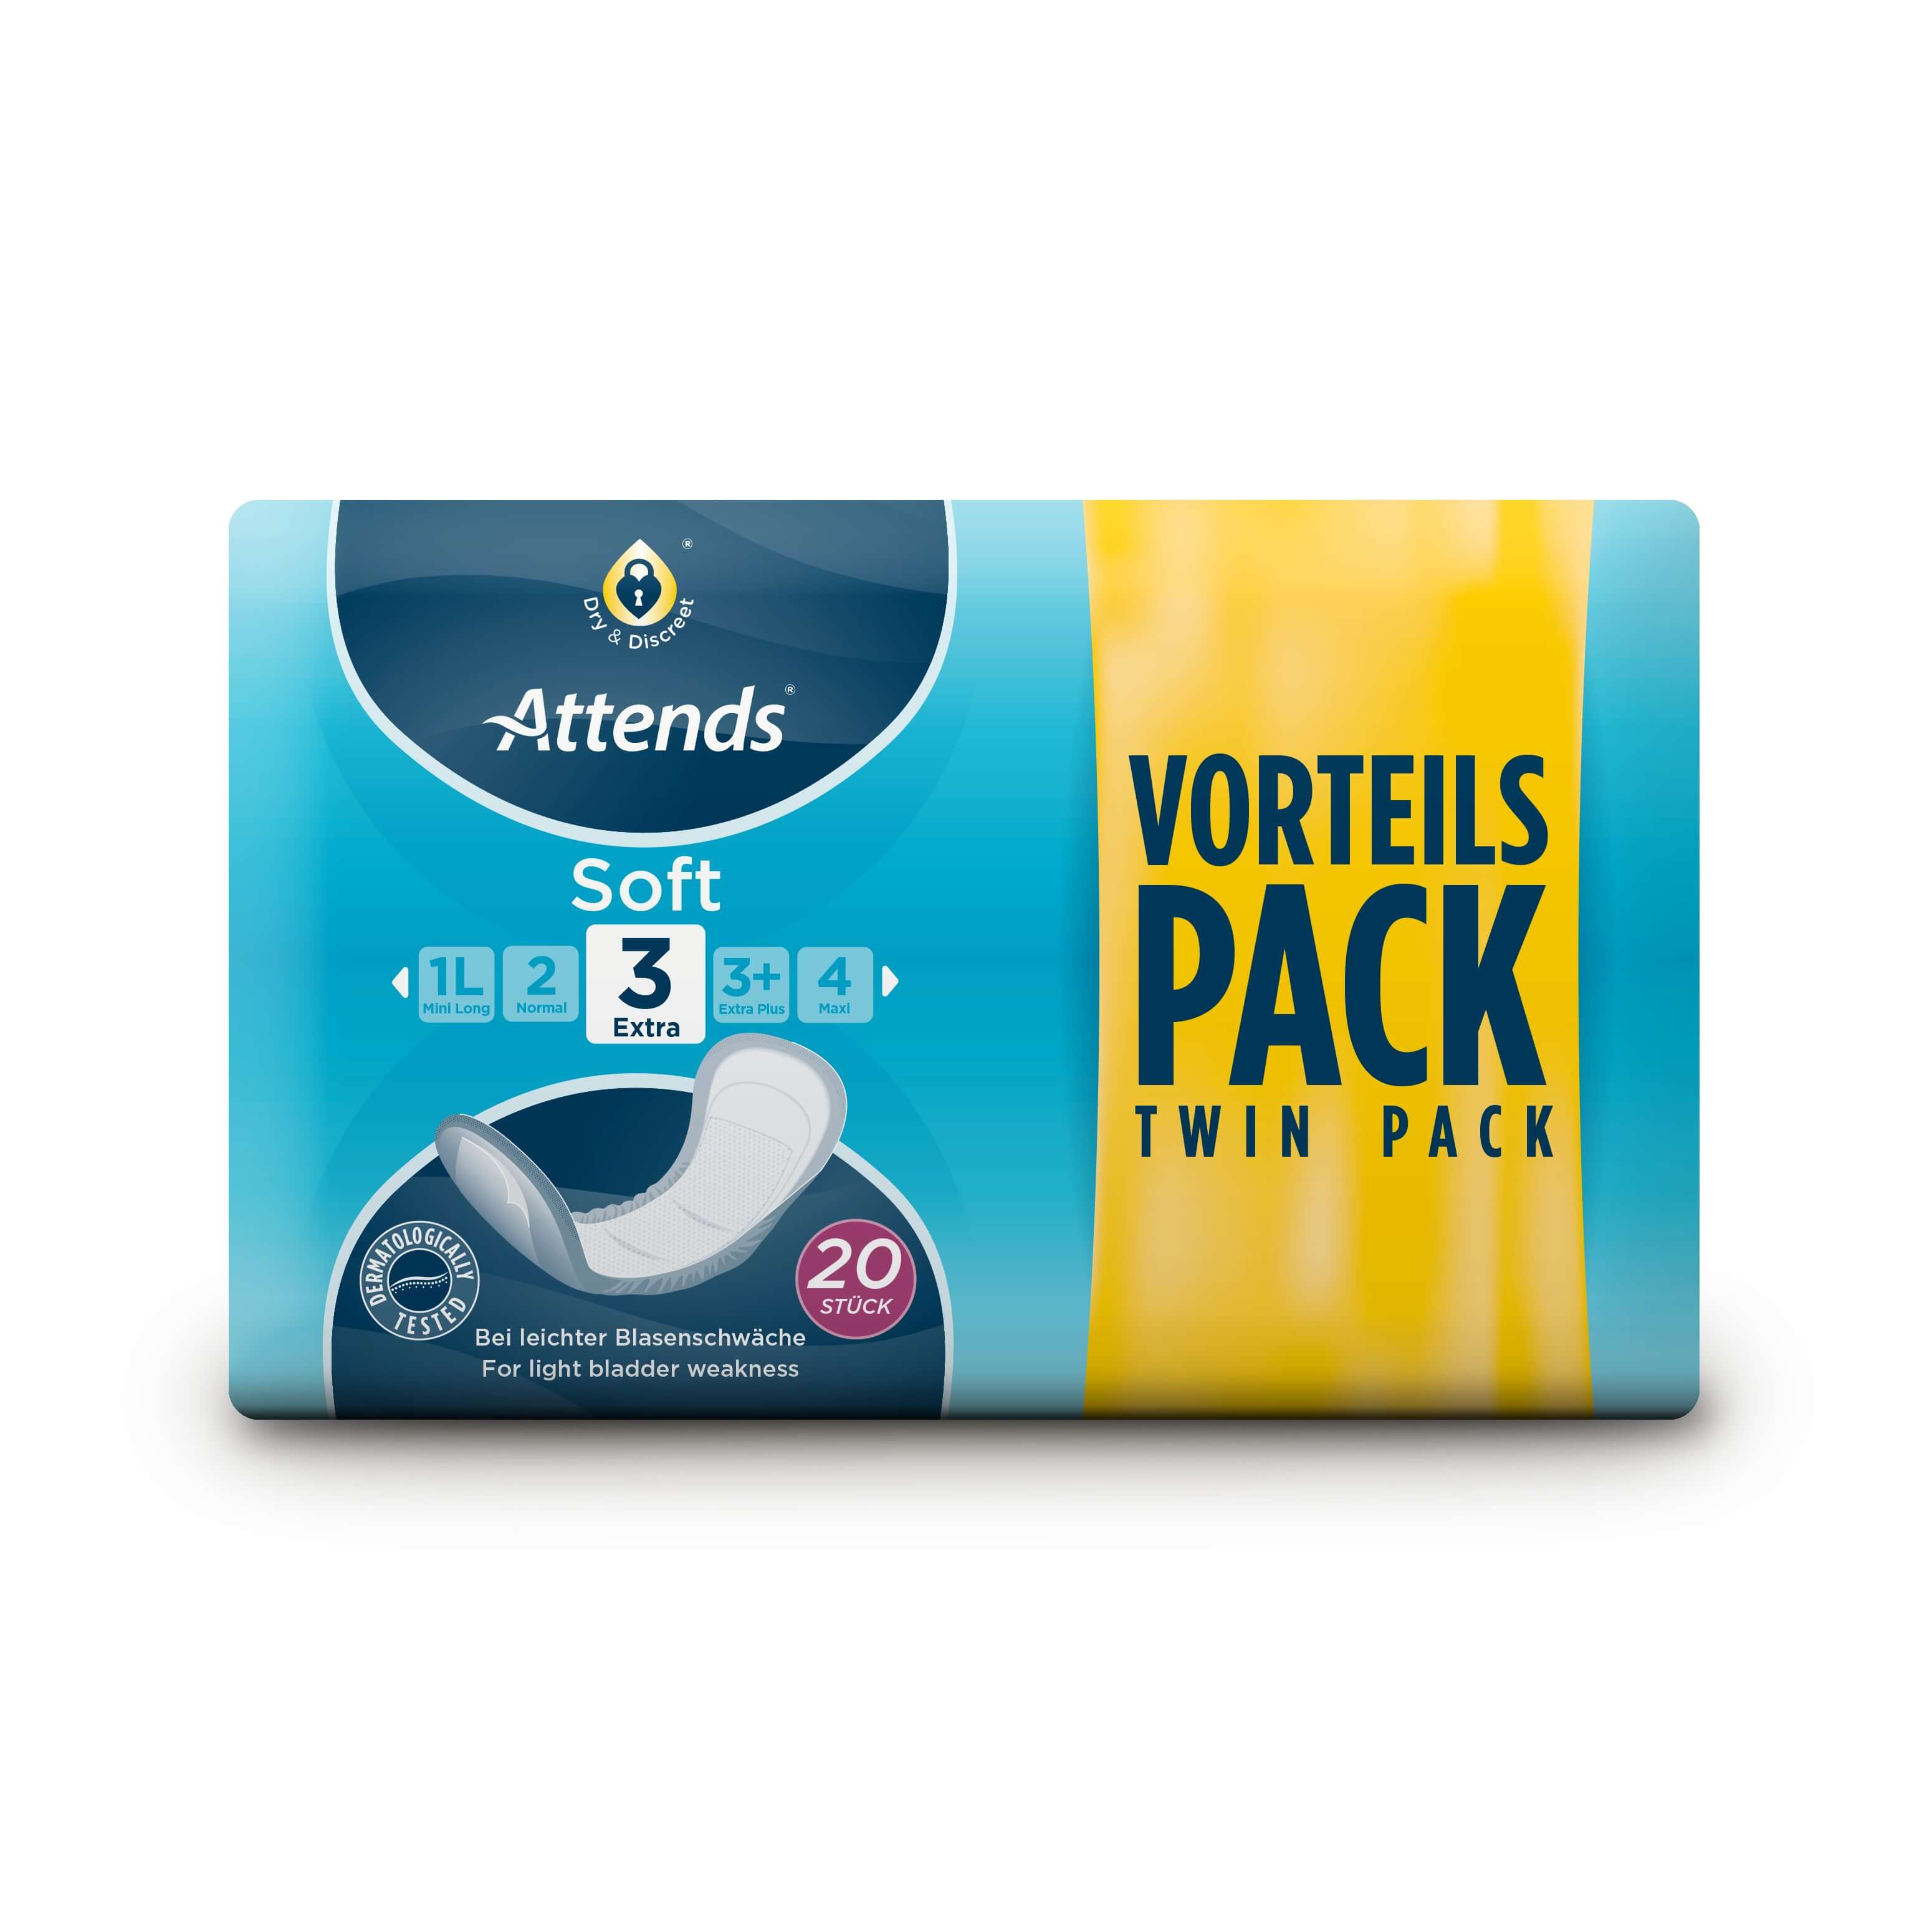 Attends soft normaal 2 Forteils Pack Twin Pack - 24 stuks